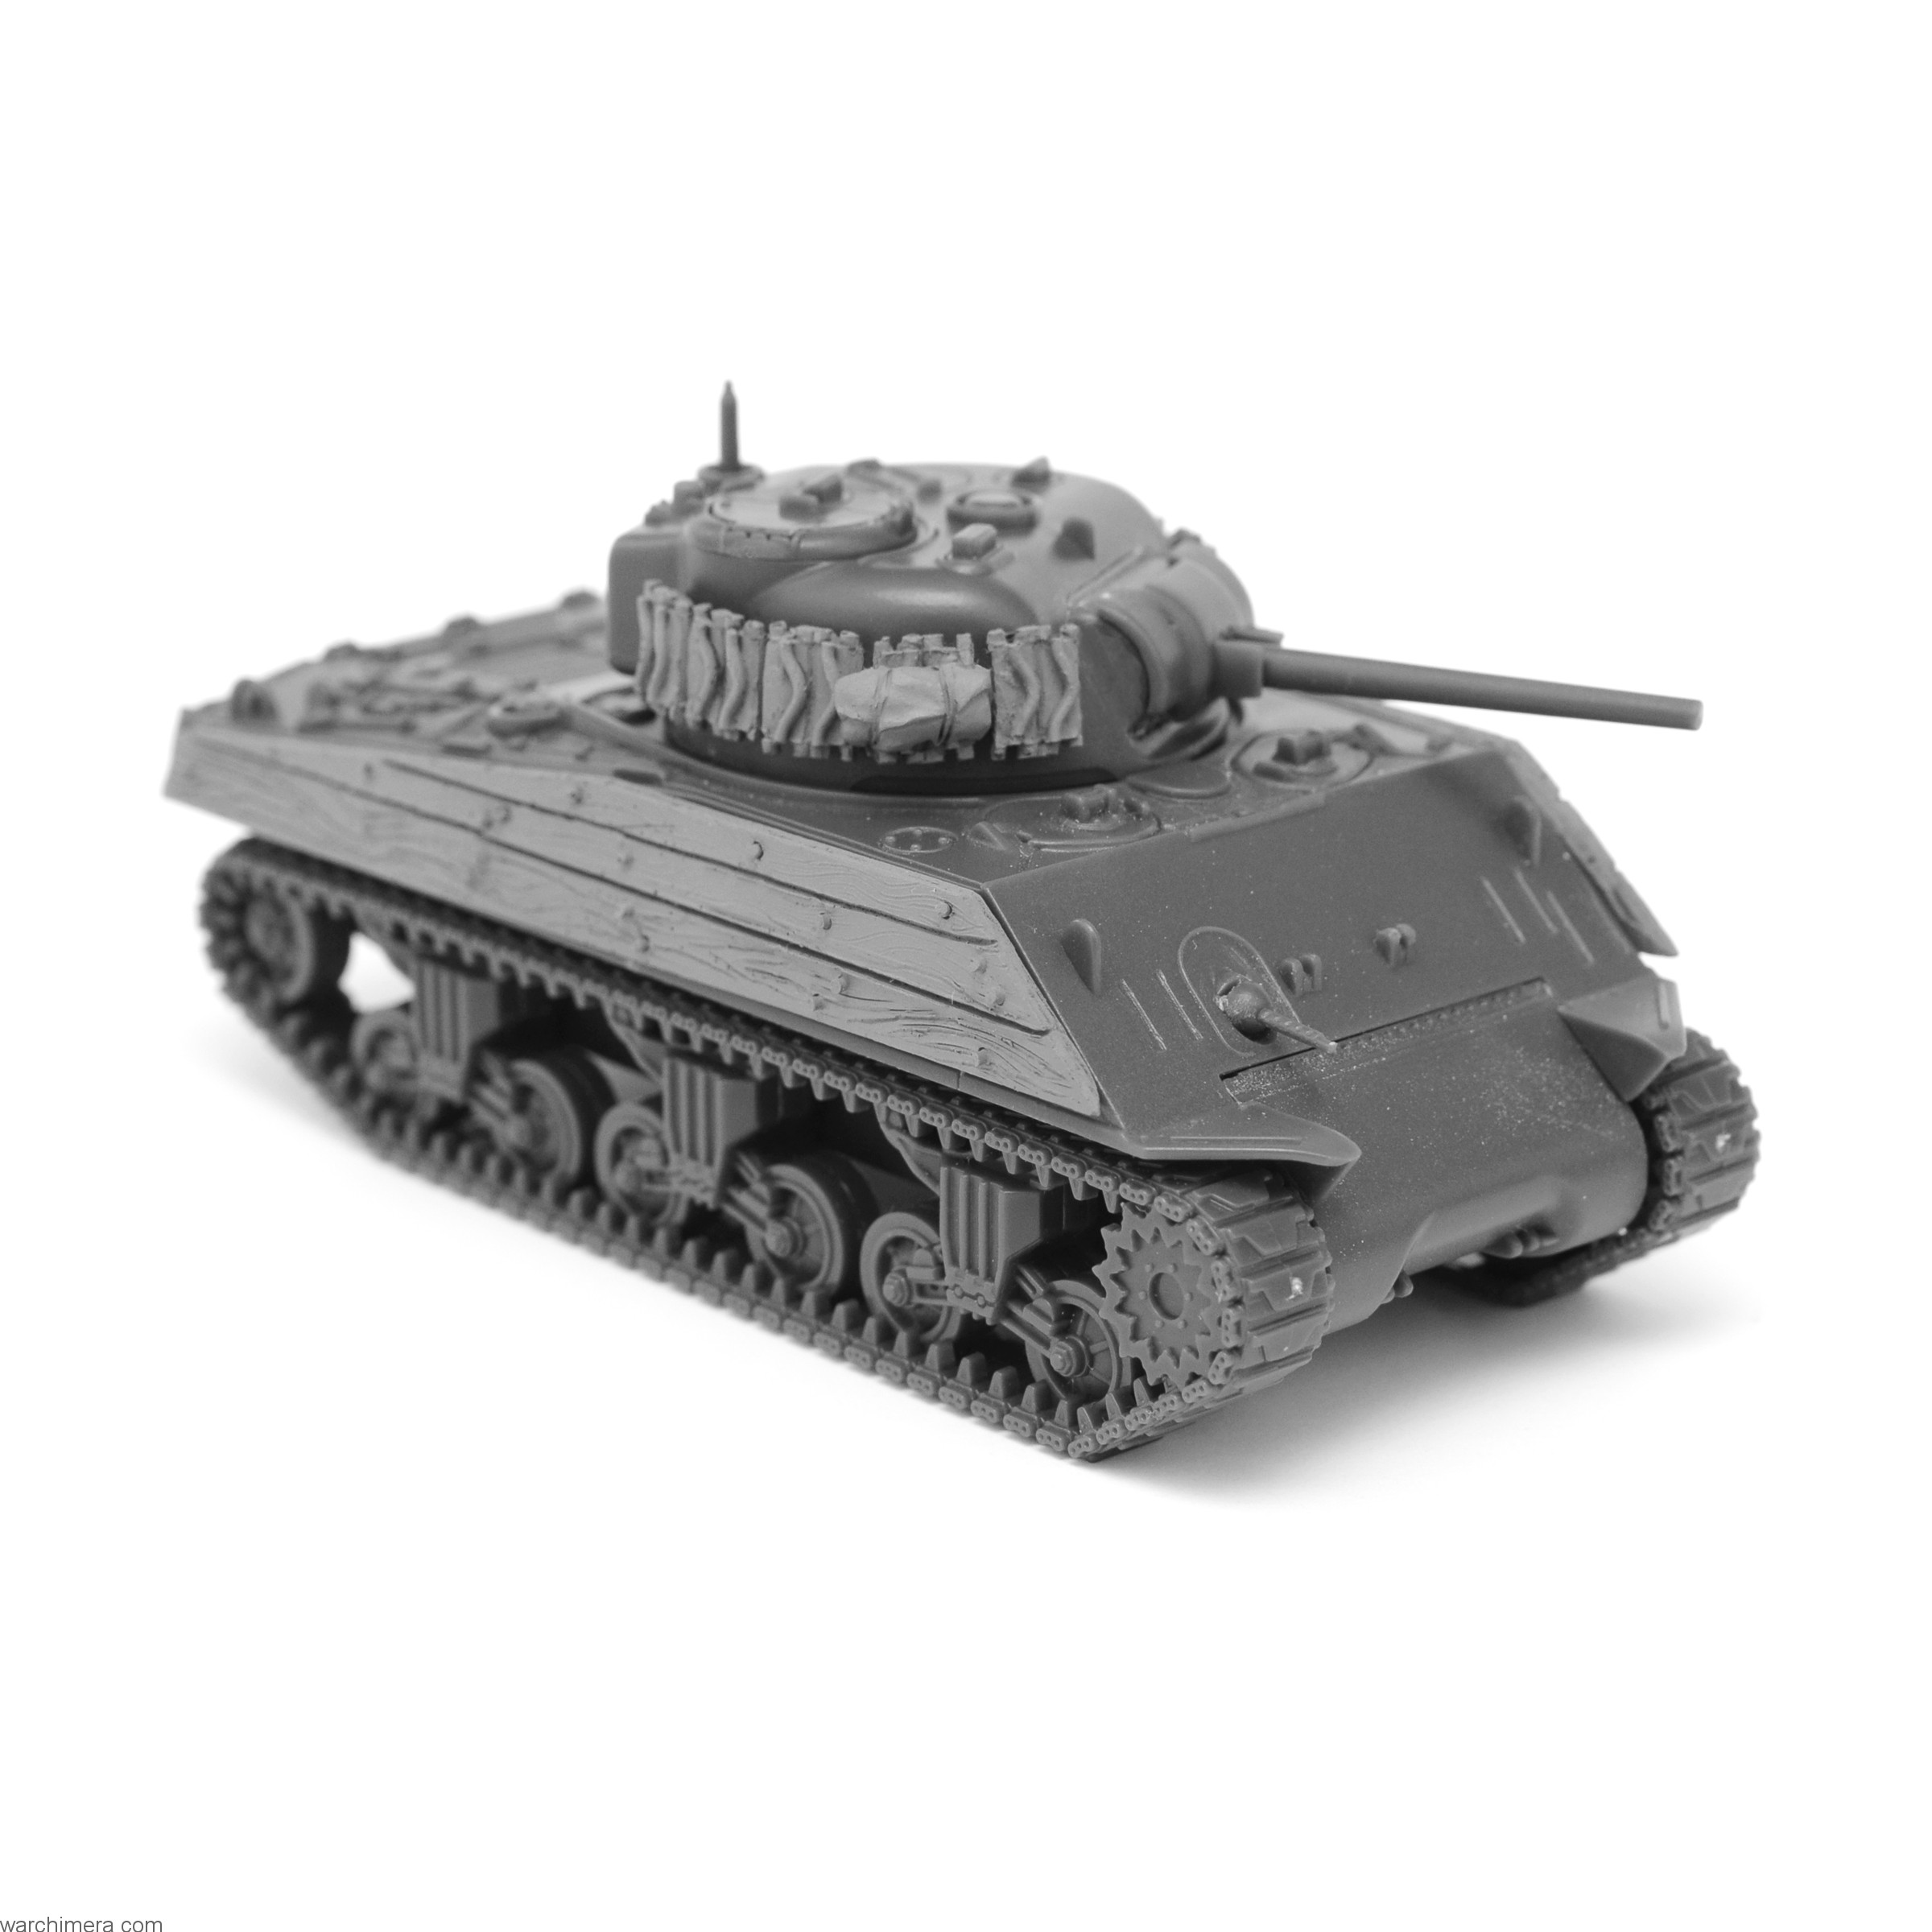 New accessories for Sherman and Panzer IV tank!